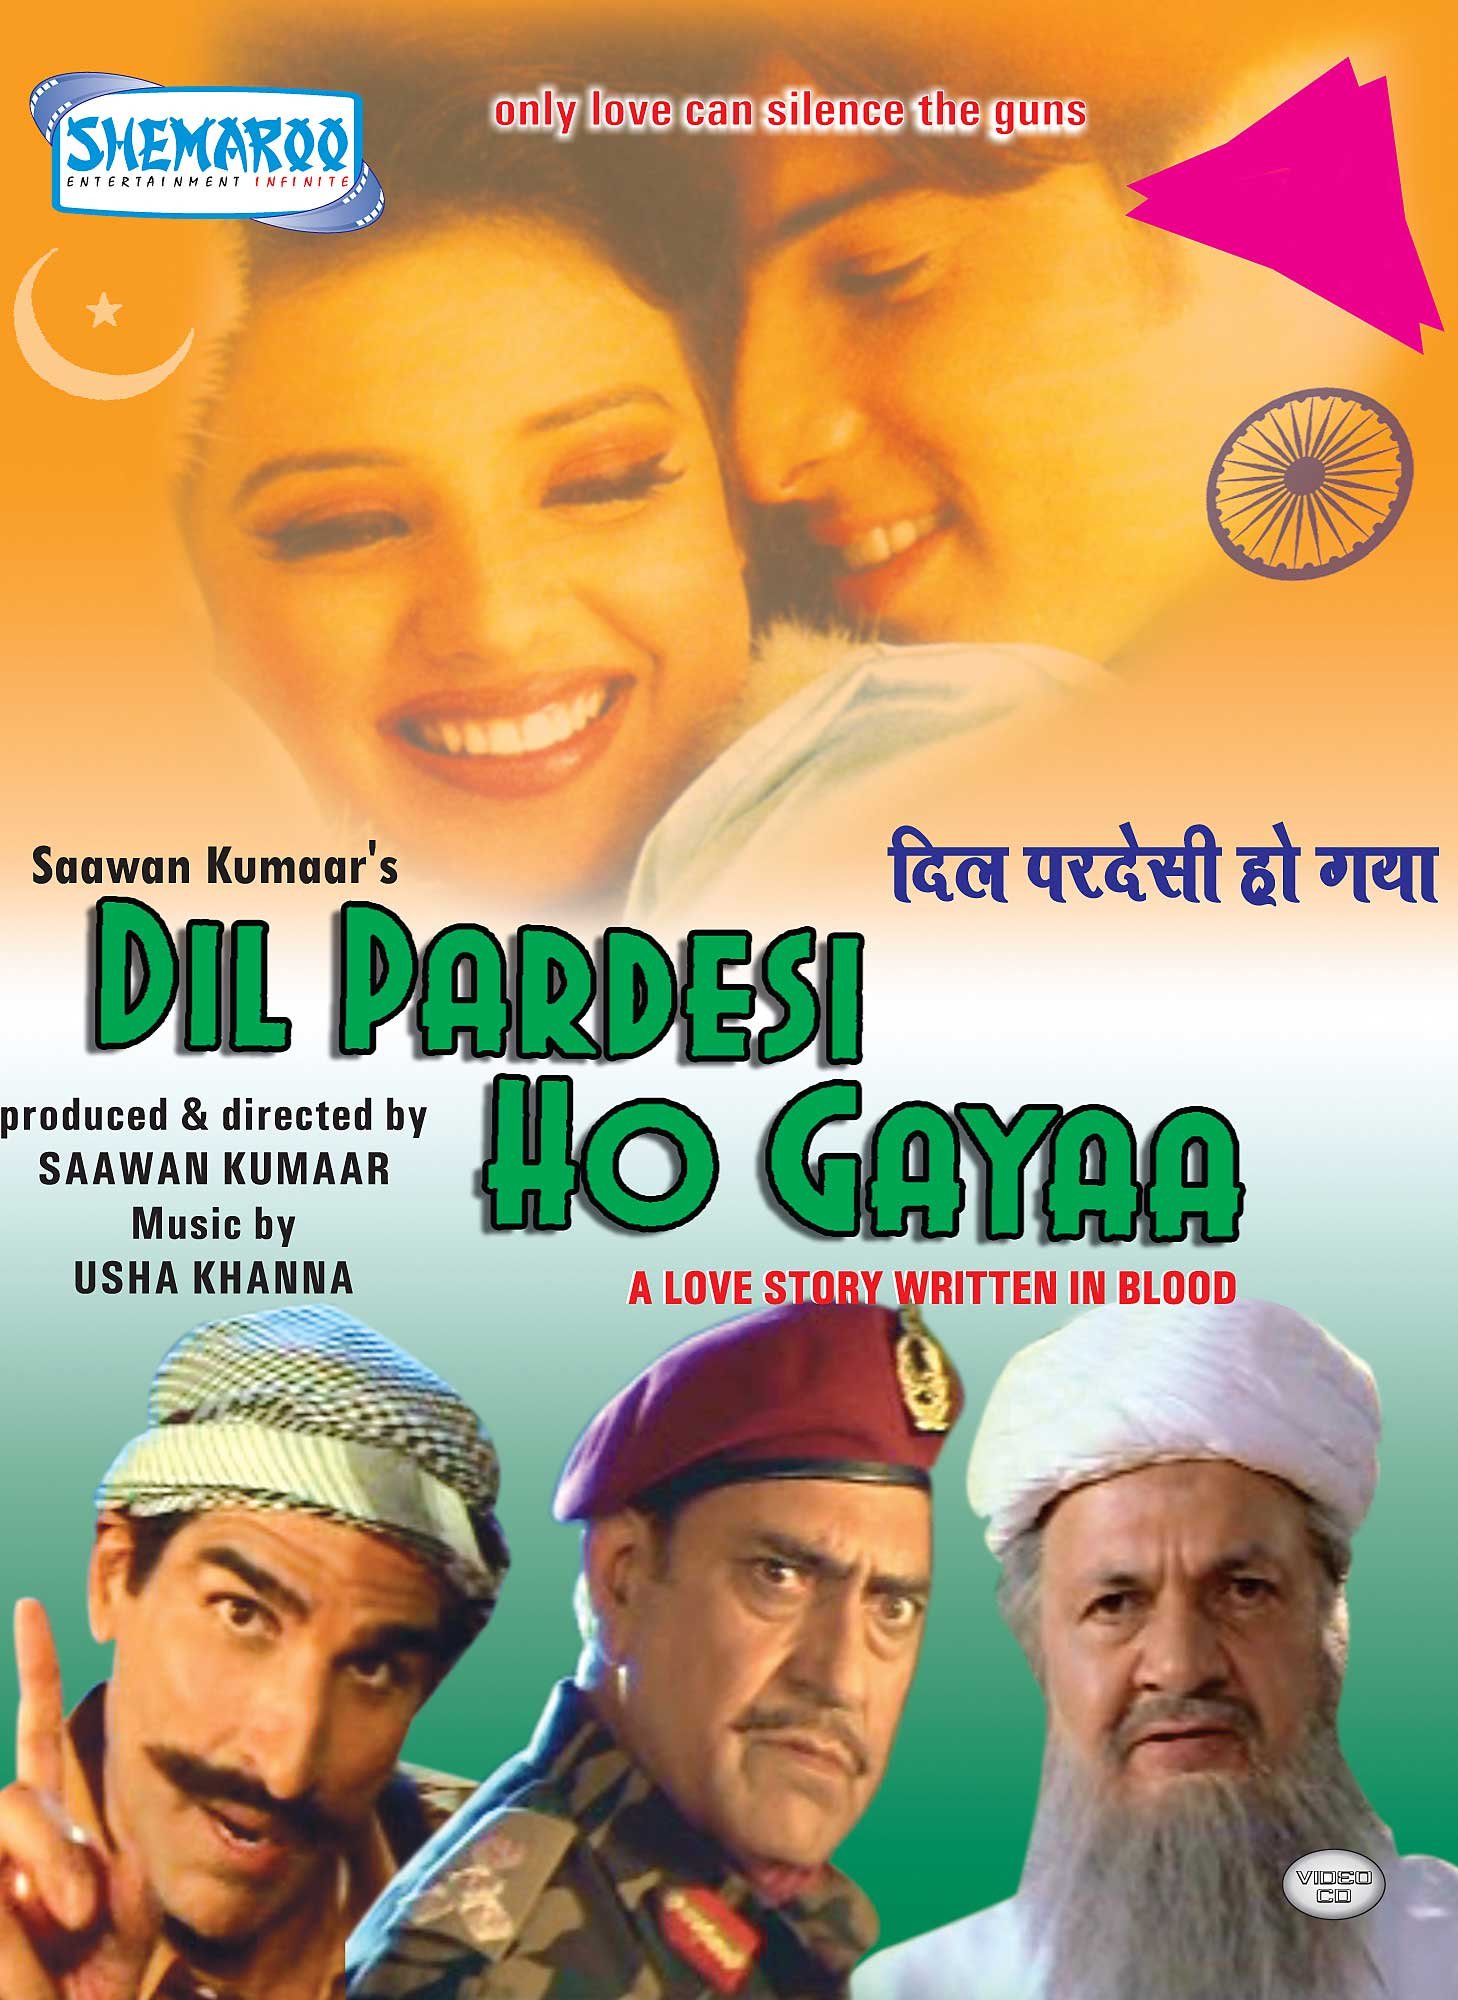 dil-pardesi-ho-gayaa-movie-purchase-or-watch-online